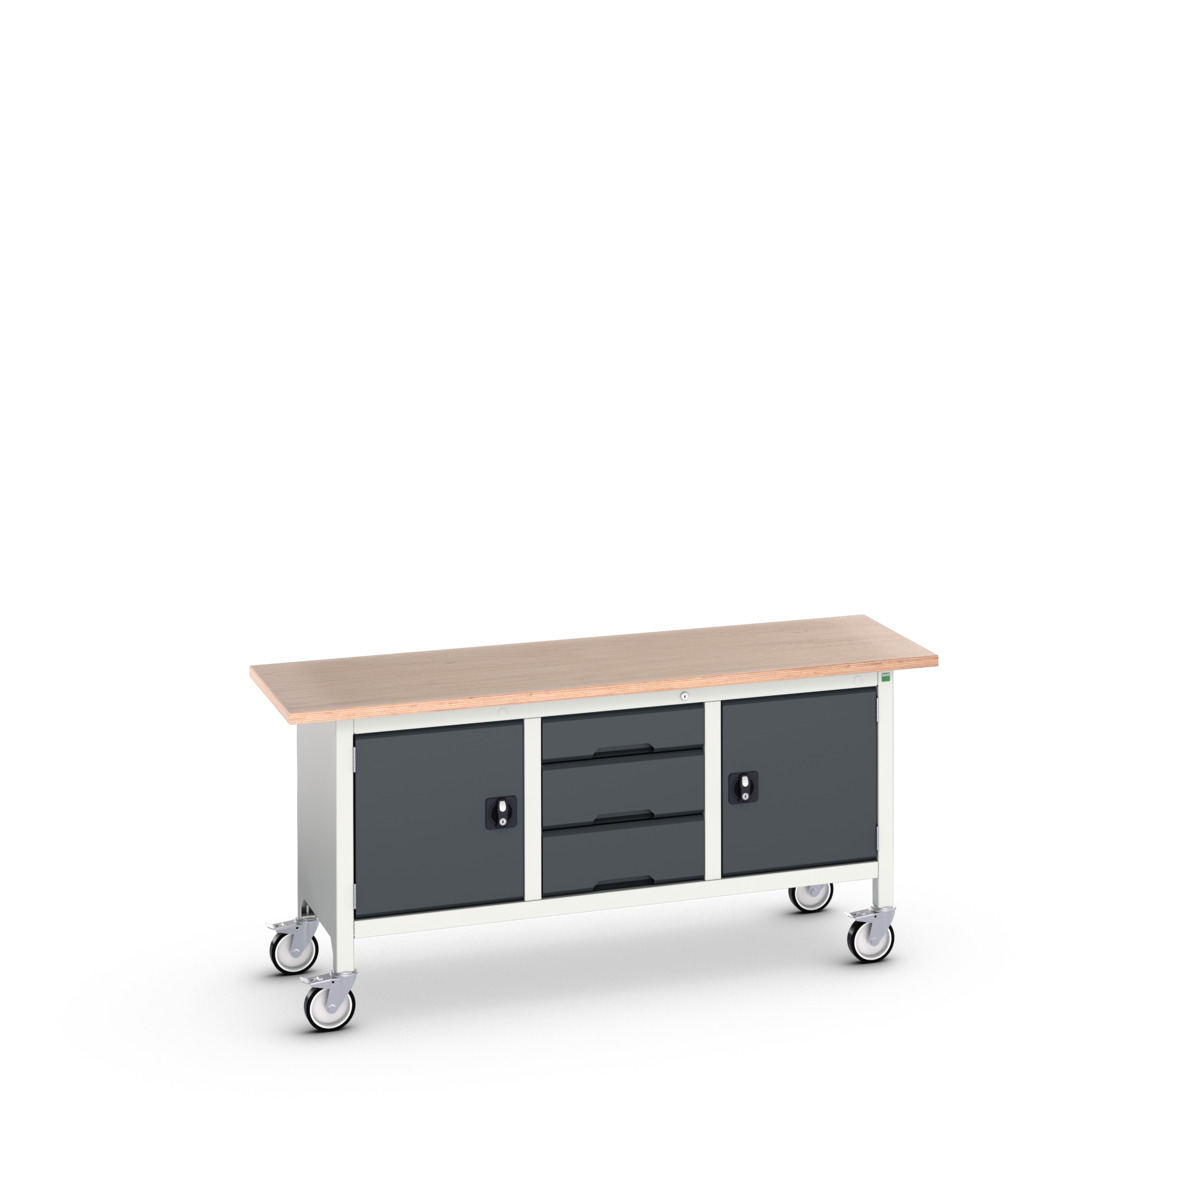 16923222.19 - verso mobile storage bench (mpx)